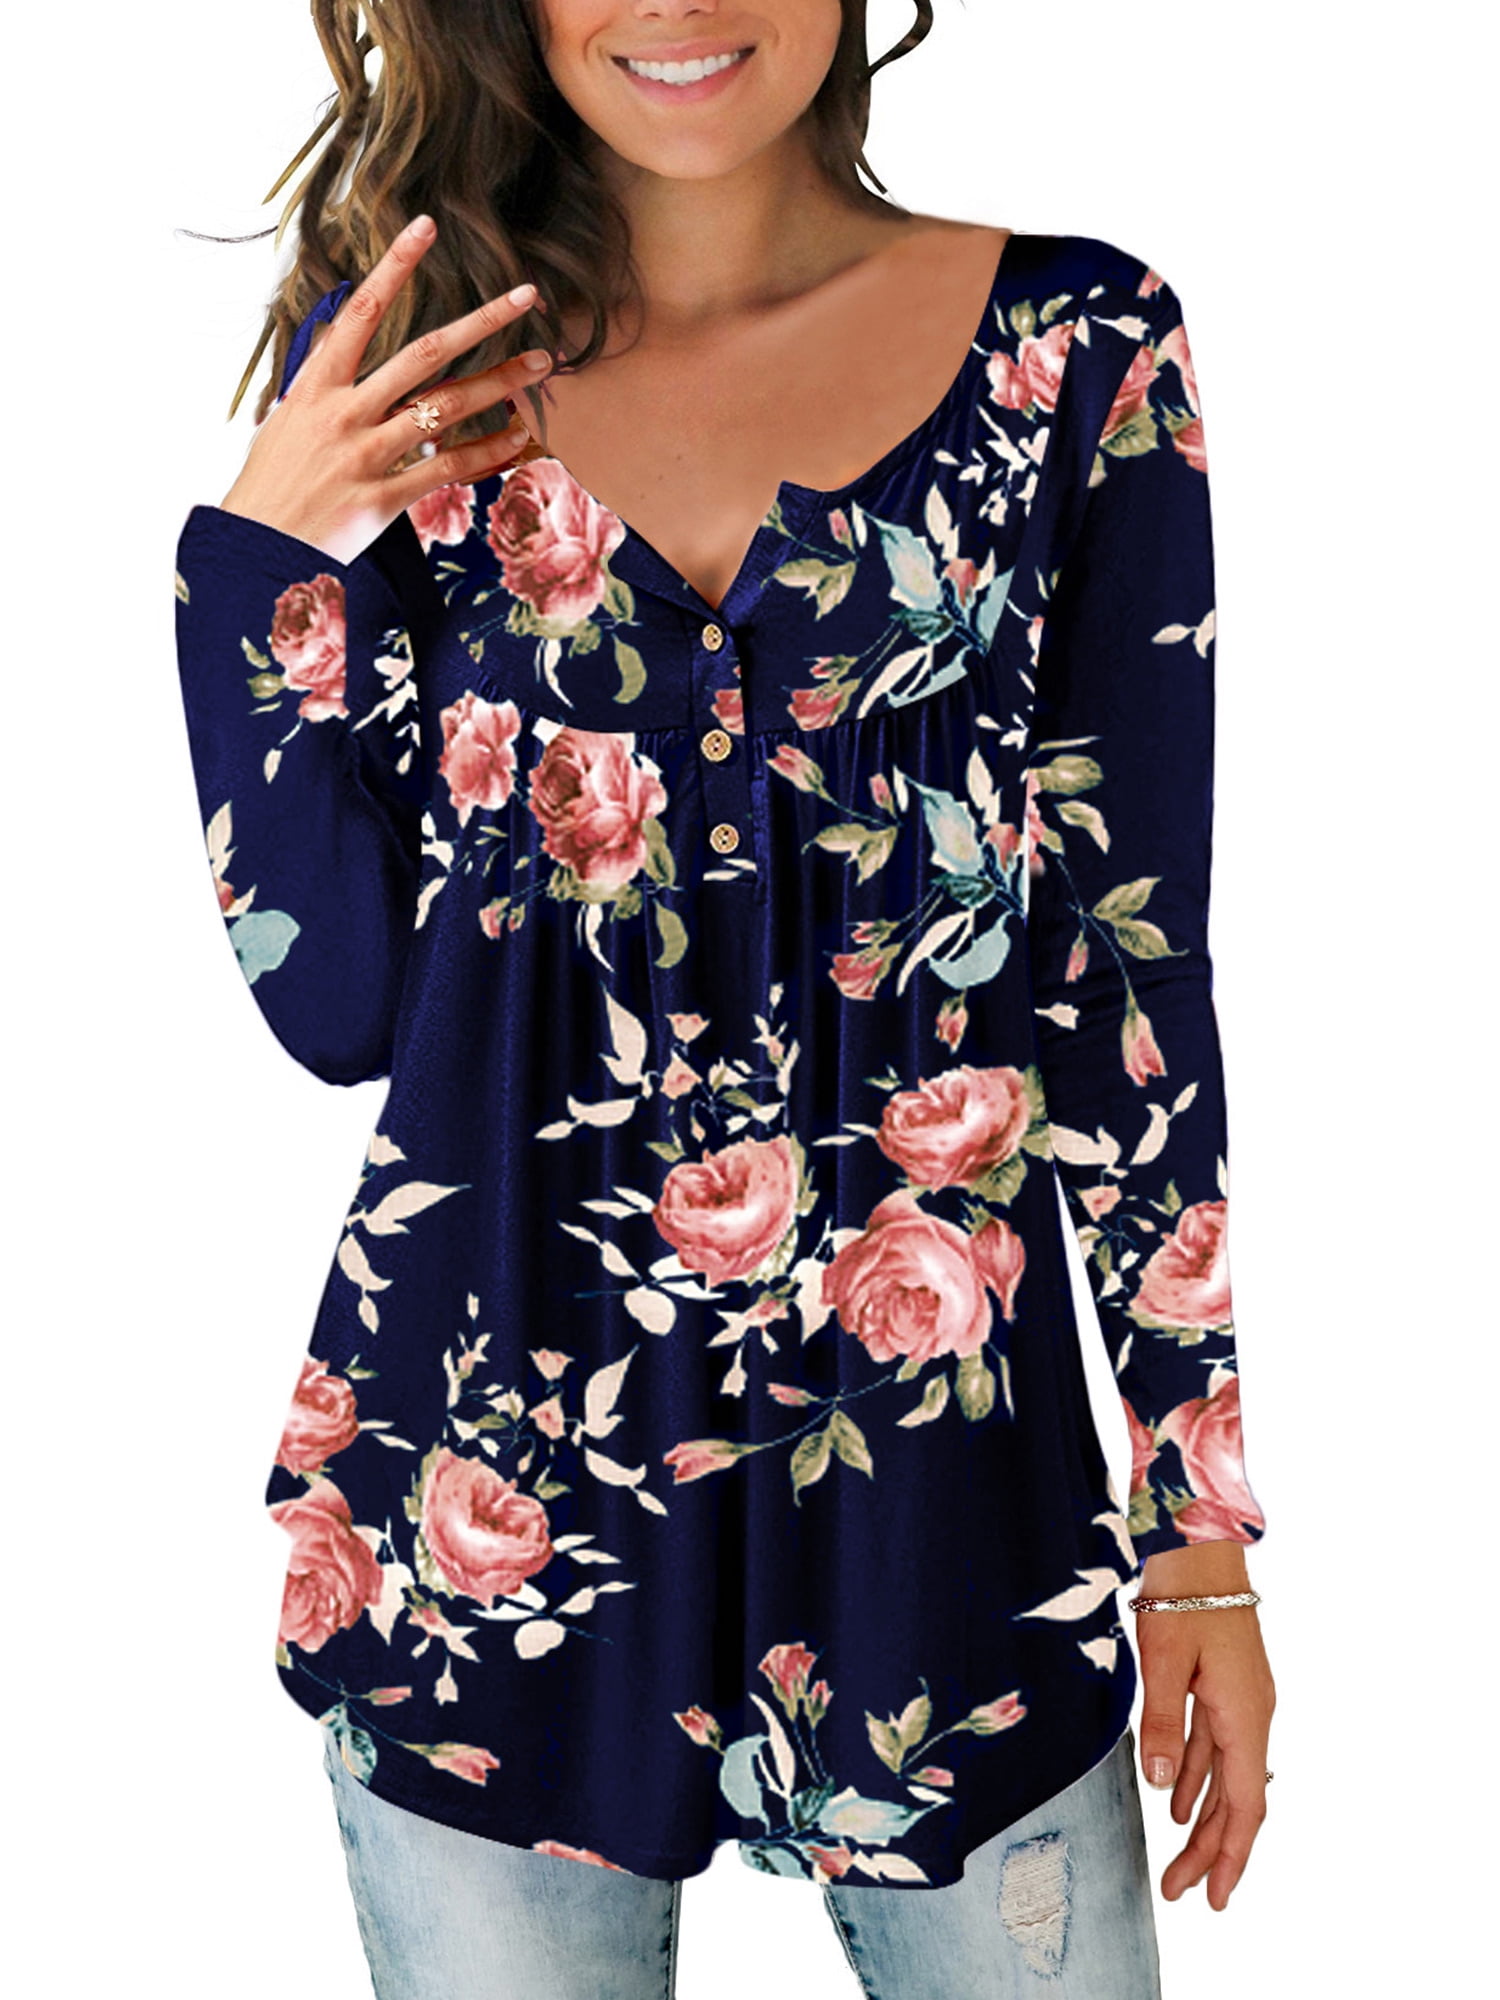 Women Floral Print Long Sleeve Tunic Tops Ladies V Neck Casual Blouse ...